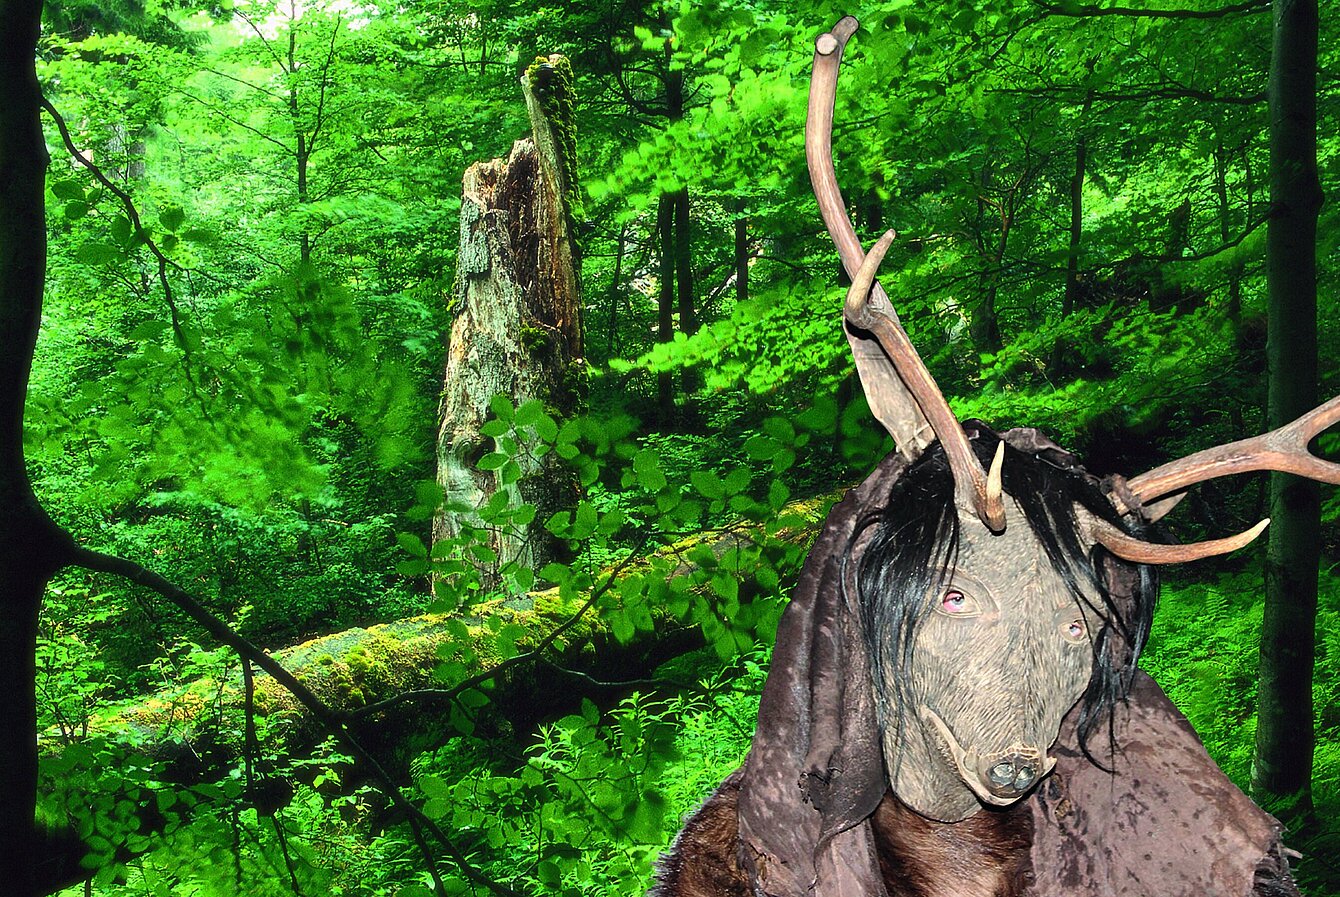 Photography of a natural green mixed forest. In front of it stands a man wearing a mask. The mask resembles a wild boar, but has deer antlers.